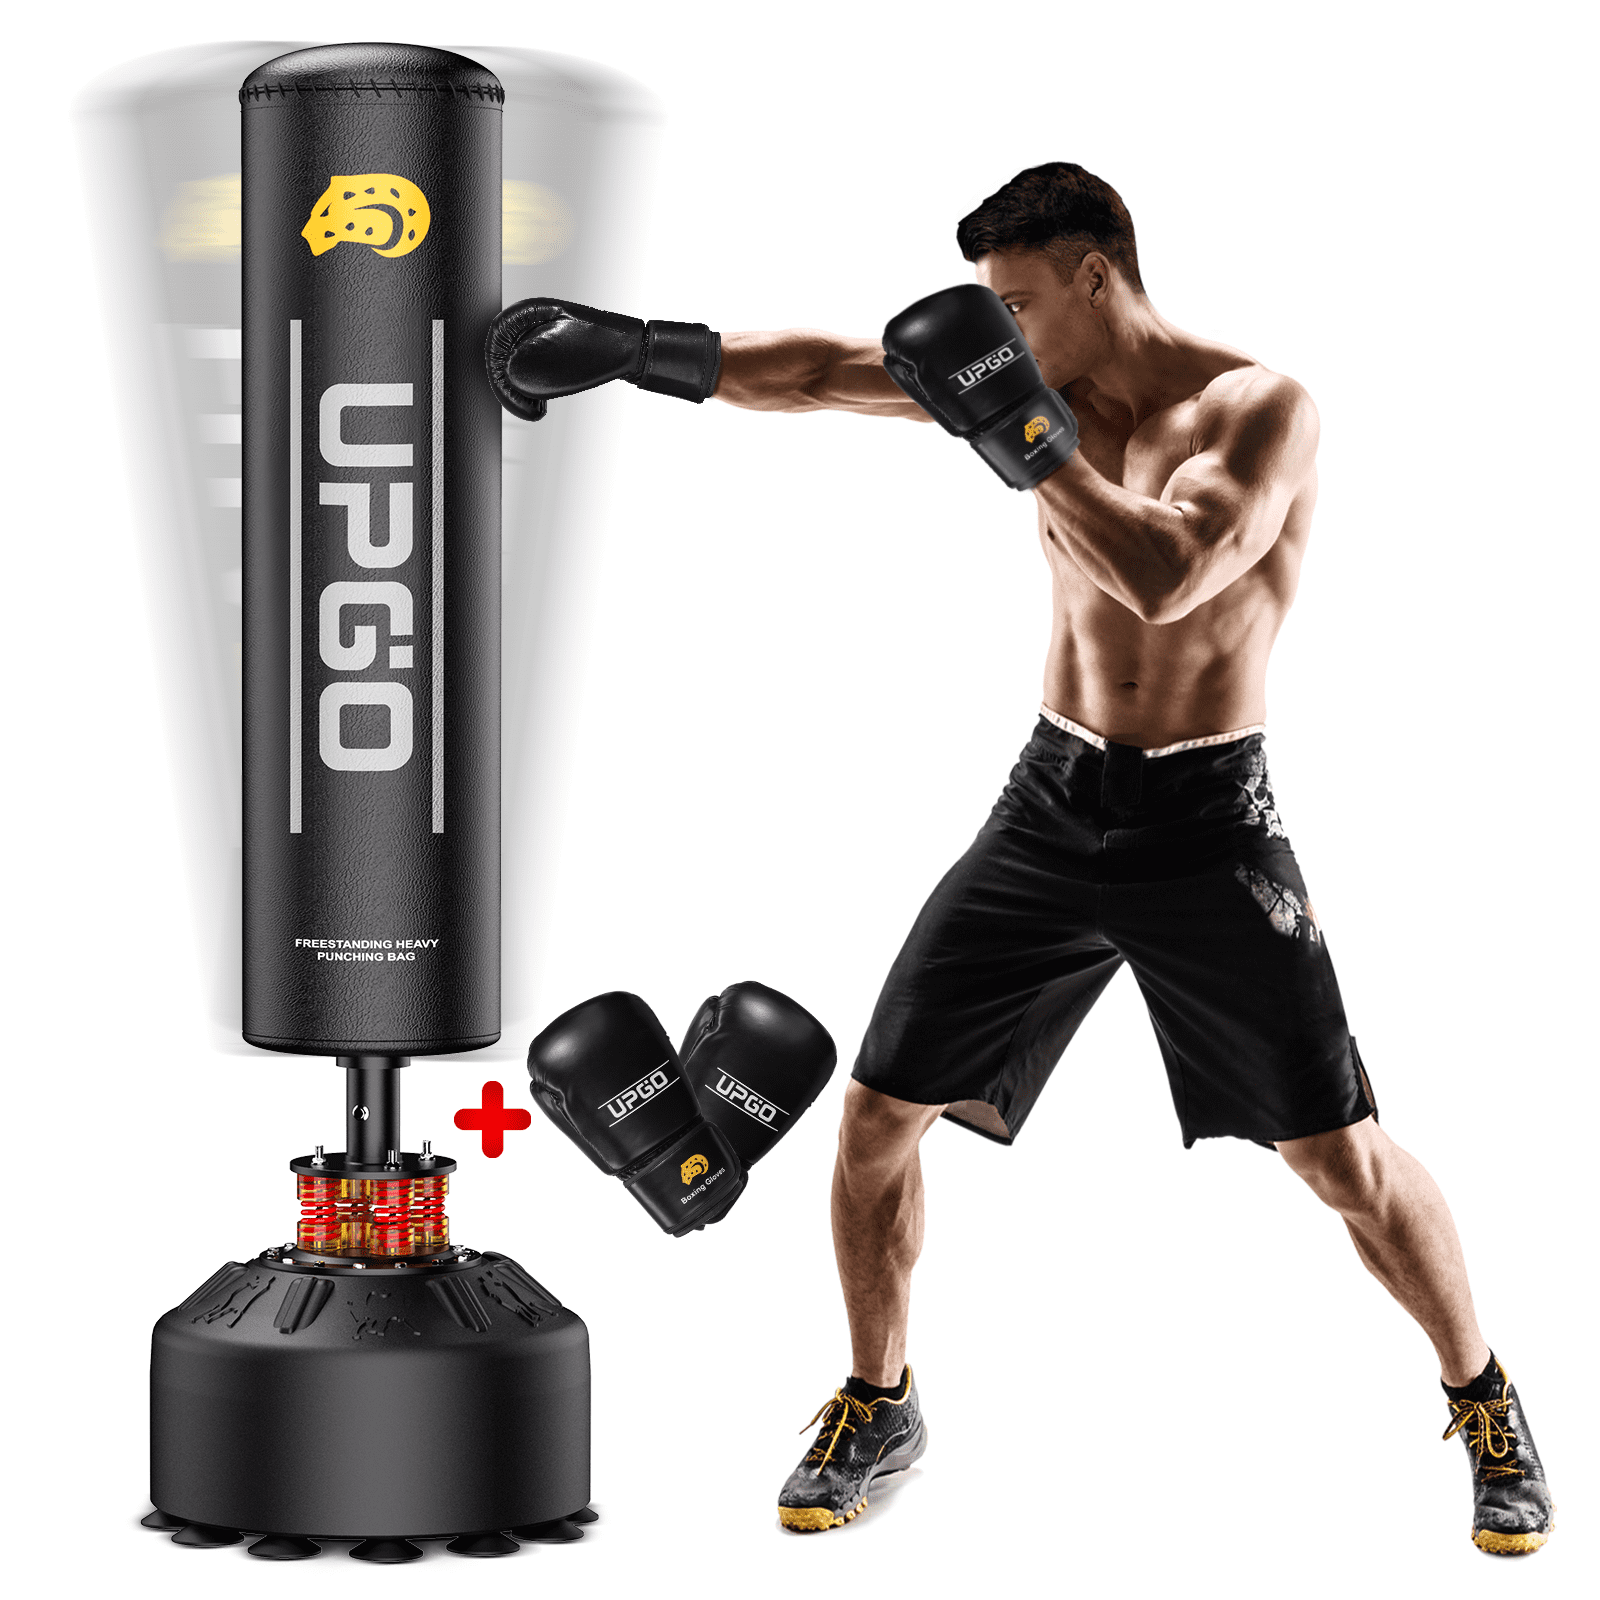 Details about   New heavy duty kickboxing trainer MD sports game punching bag workout free shipp 